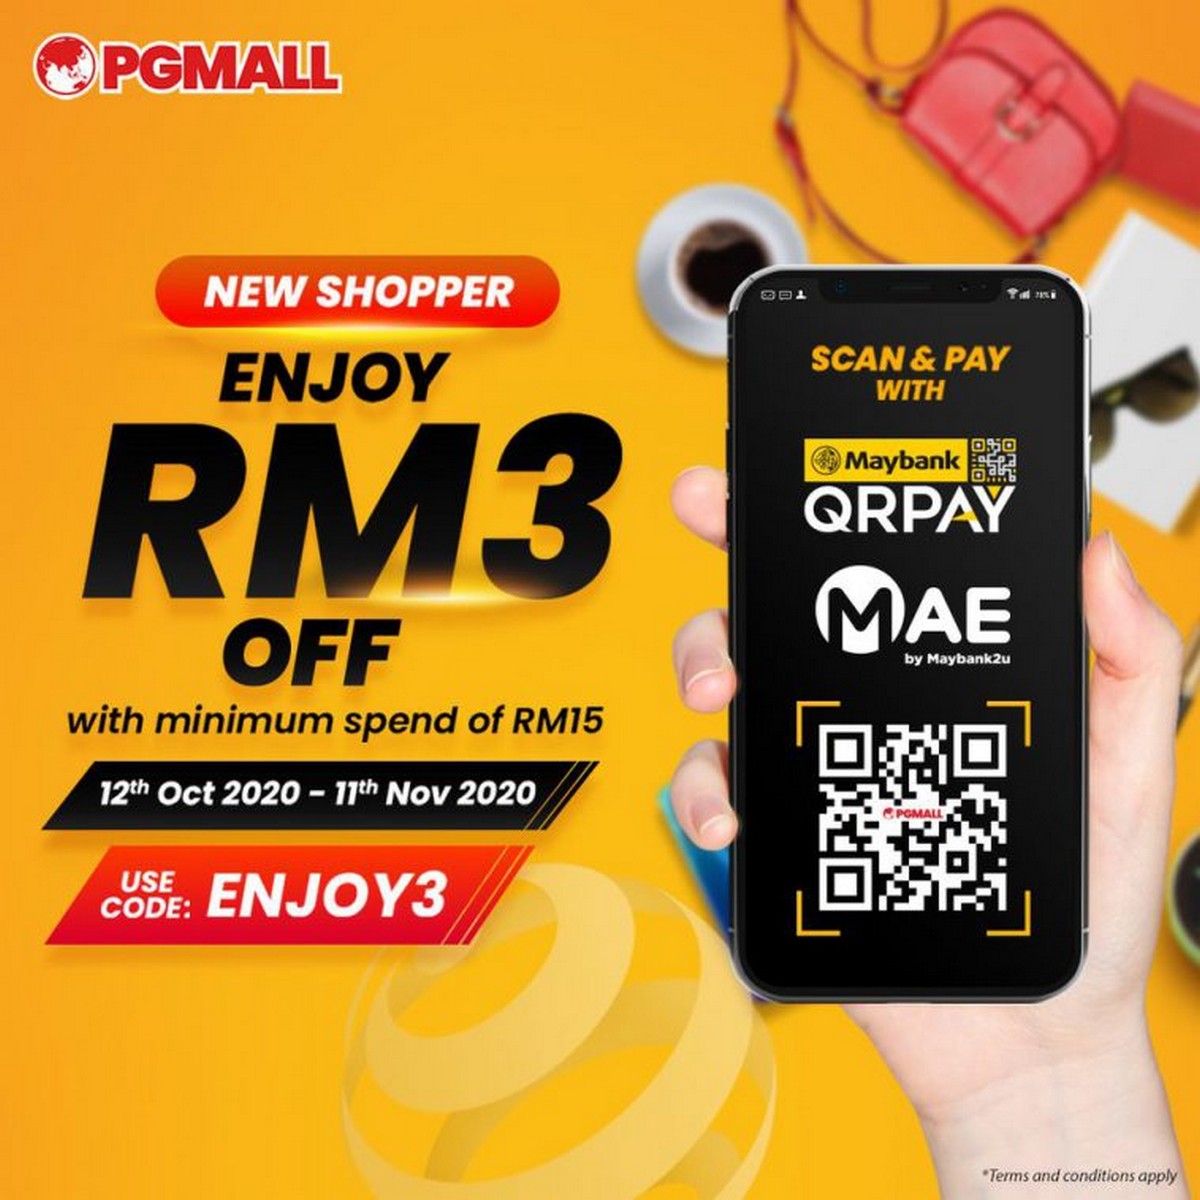 iv.-Use-MAE-e-wallet-to-pay-at-PGMALL-to-get-RM3-cash-rebate - News 